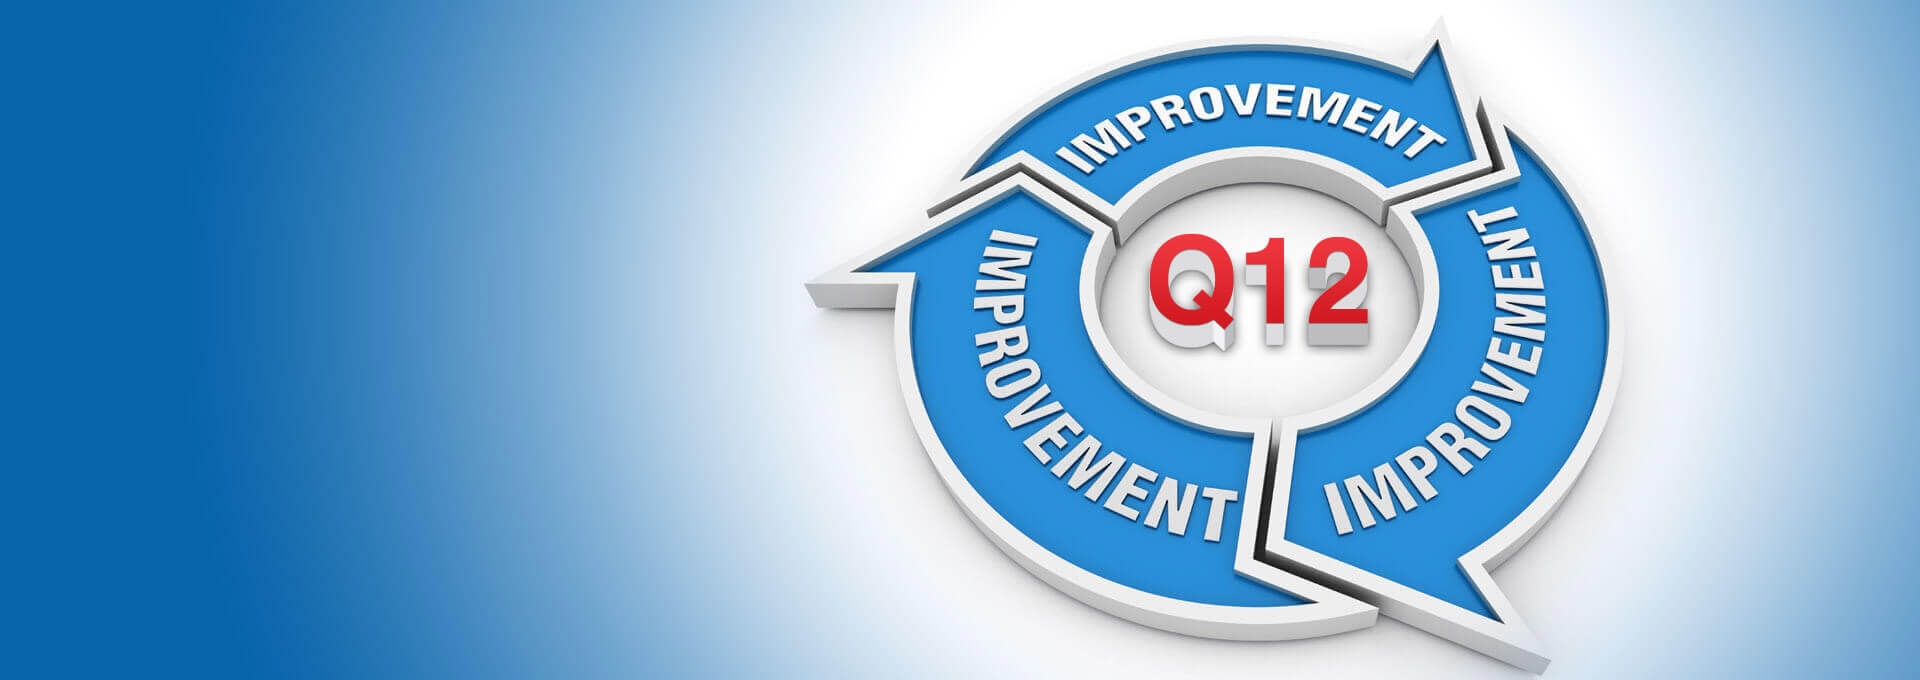 FDA Shares Views on ICH Q12, Continuous Improvement and Innovation